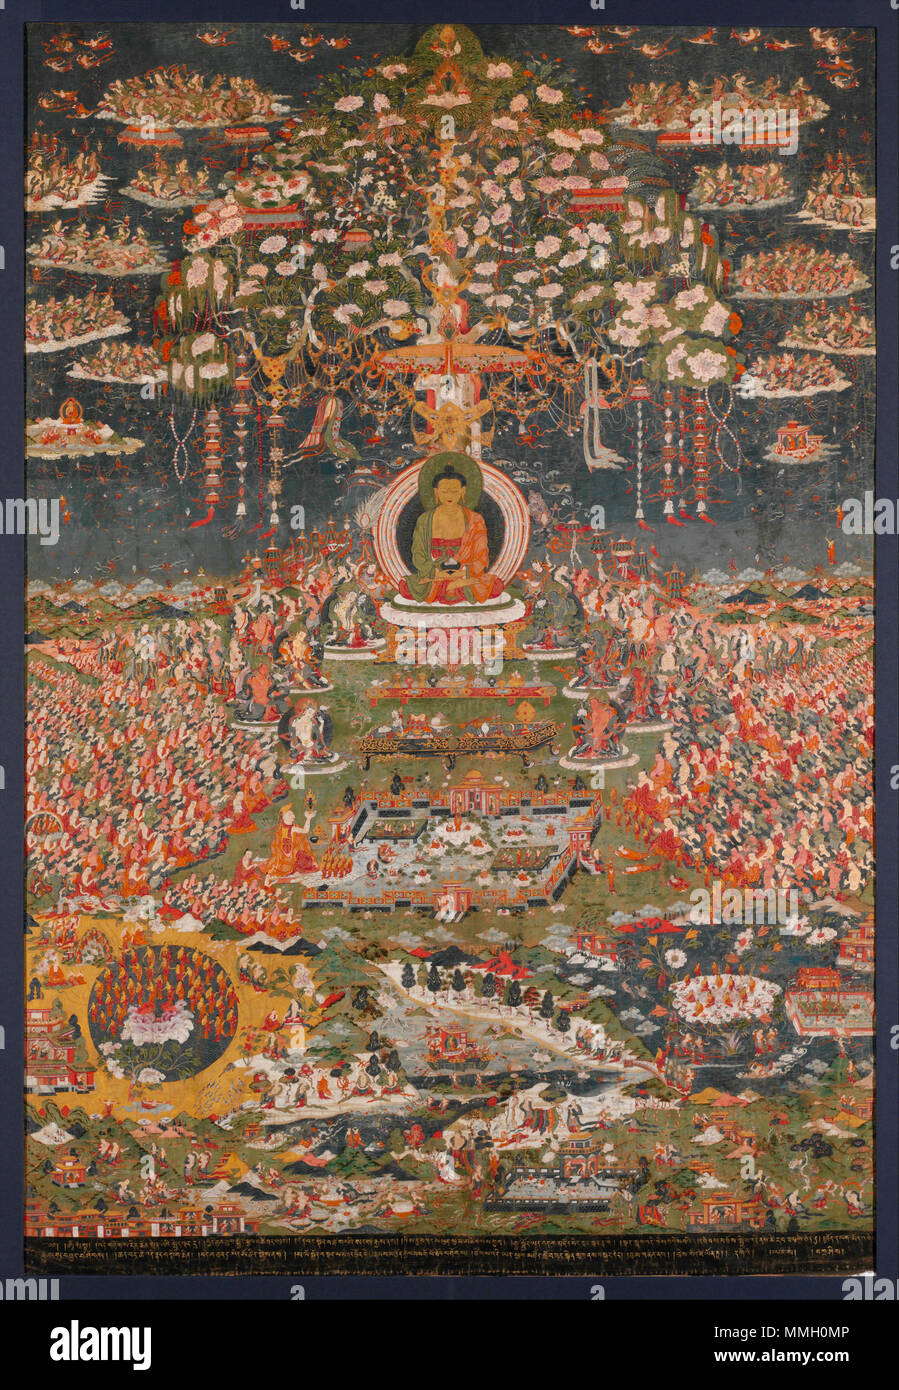 .  English: Amitāyus Buddha in His Paradise. Tibet. Distemper with gold on cloth, 56 1/4 x 39 1/2 in. (142.9 x 100.3 cm). Amitayus, the Buddha of Eternal Life, is also known as Amitabha, one of the five Cosmic Buddhas of Esoteric Buddhism. He is shown in his paradise, Sukhavati, the Western Pure Land, enthroned beneath a flowering tree festooned with strands of jewels and auspicious symbols. To either side the sky is filled with throngs of ecstatic demigods who bear offerings and scatter flowers. Seated below are the eight great bodhisattvas, and between them are two large, low tables covered  Stock Photo